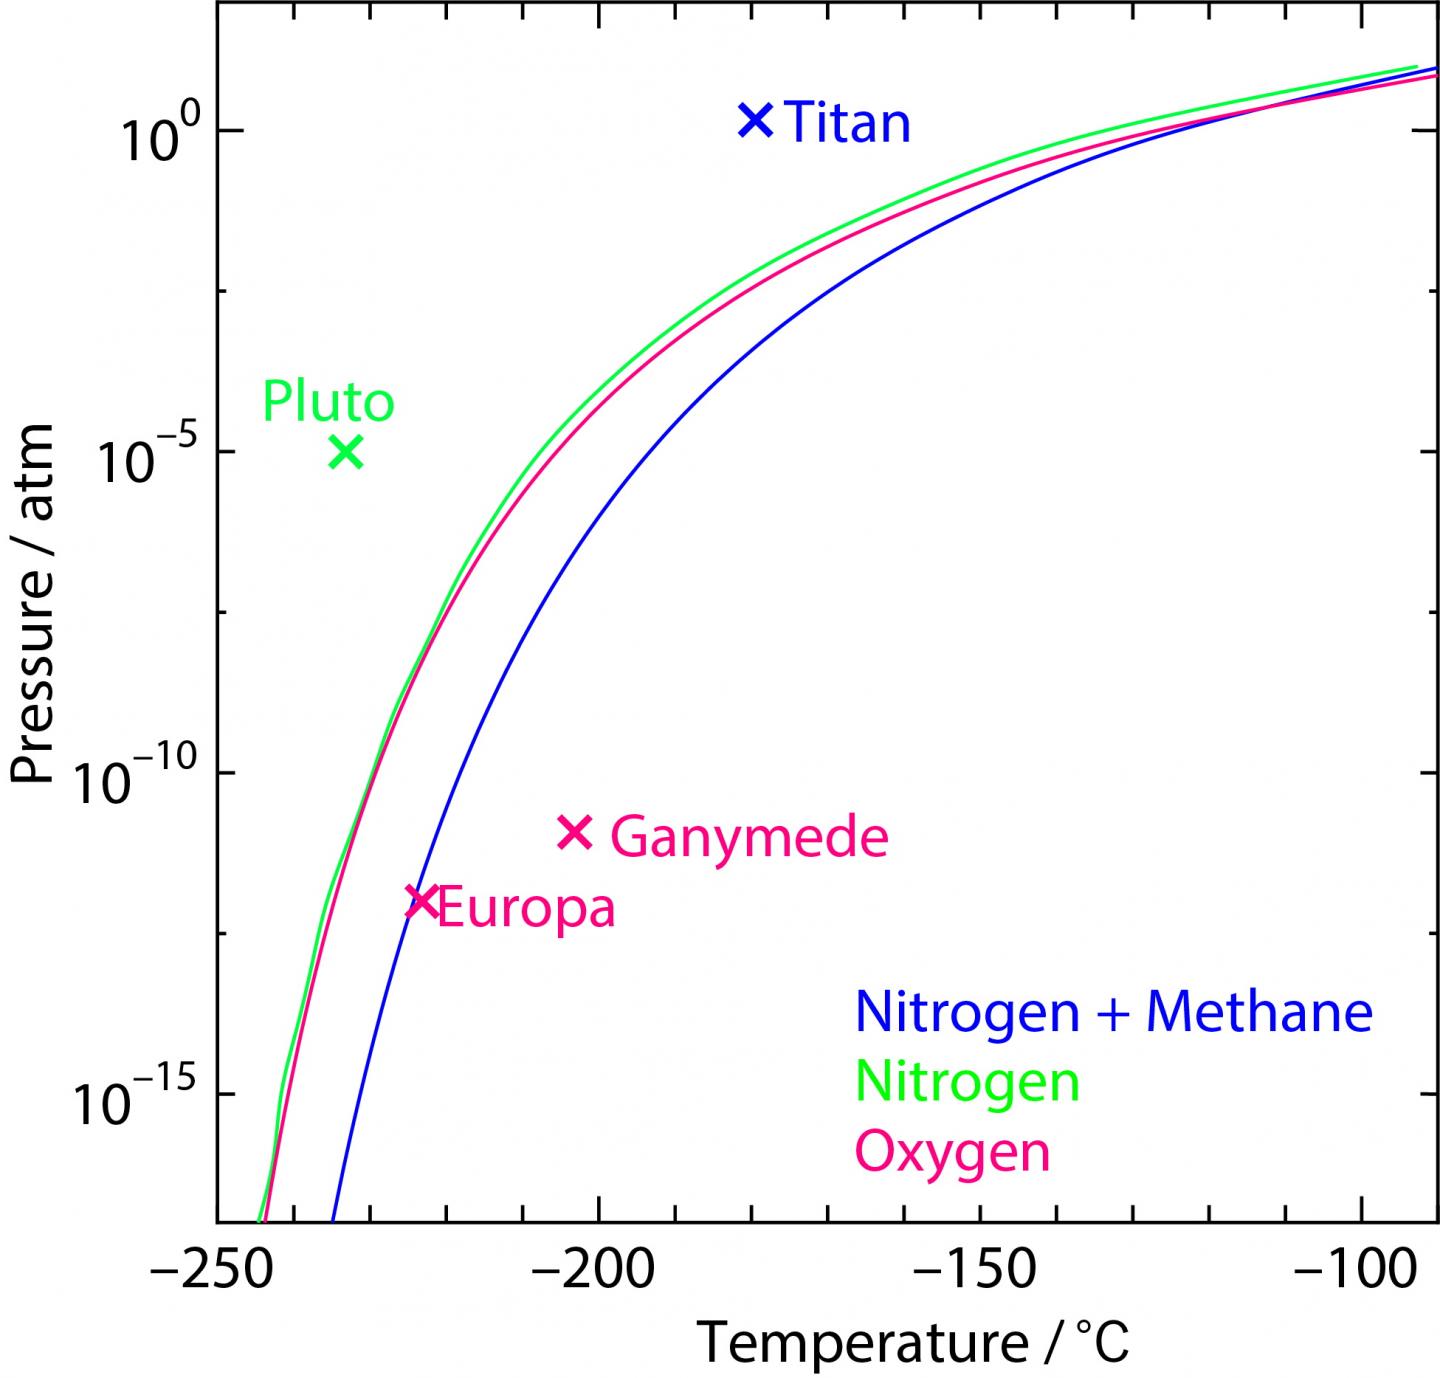 Stability boundaries of clathrate hydrates and thermodynamic conditions of celestial bodies